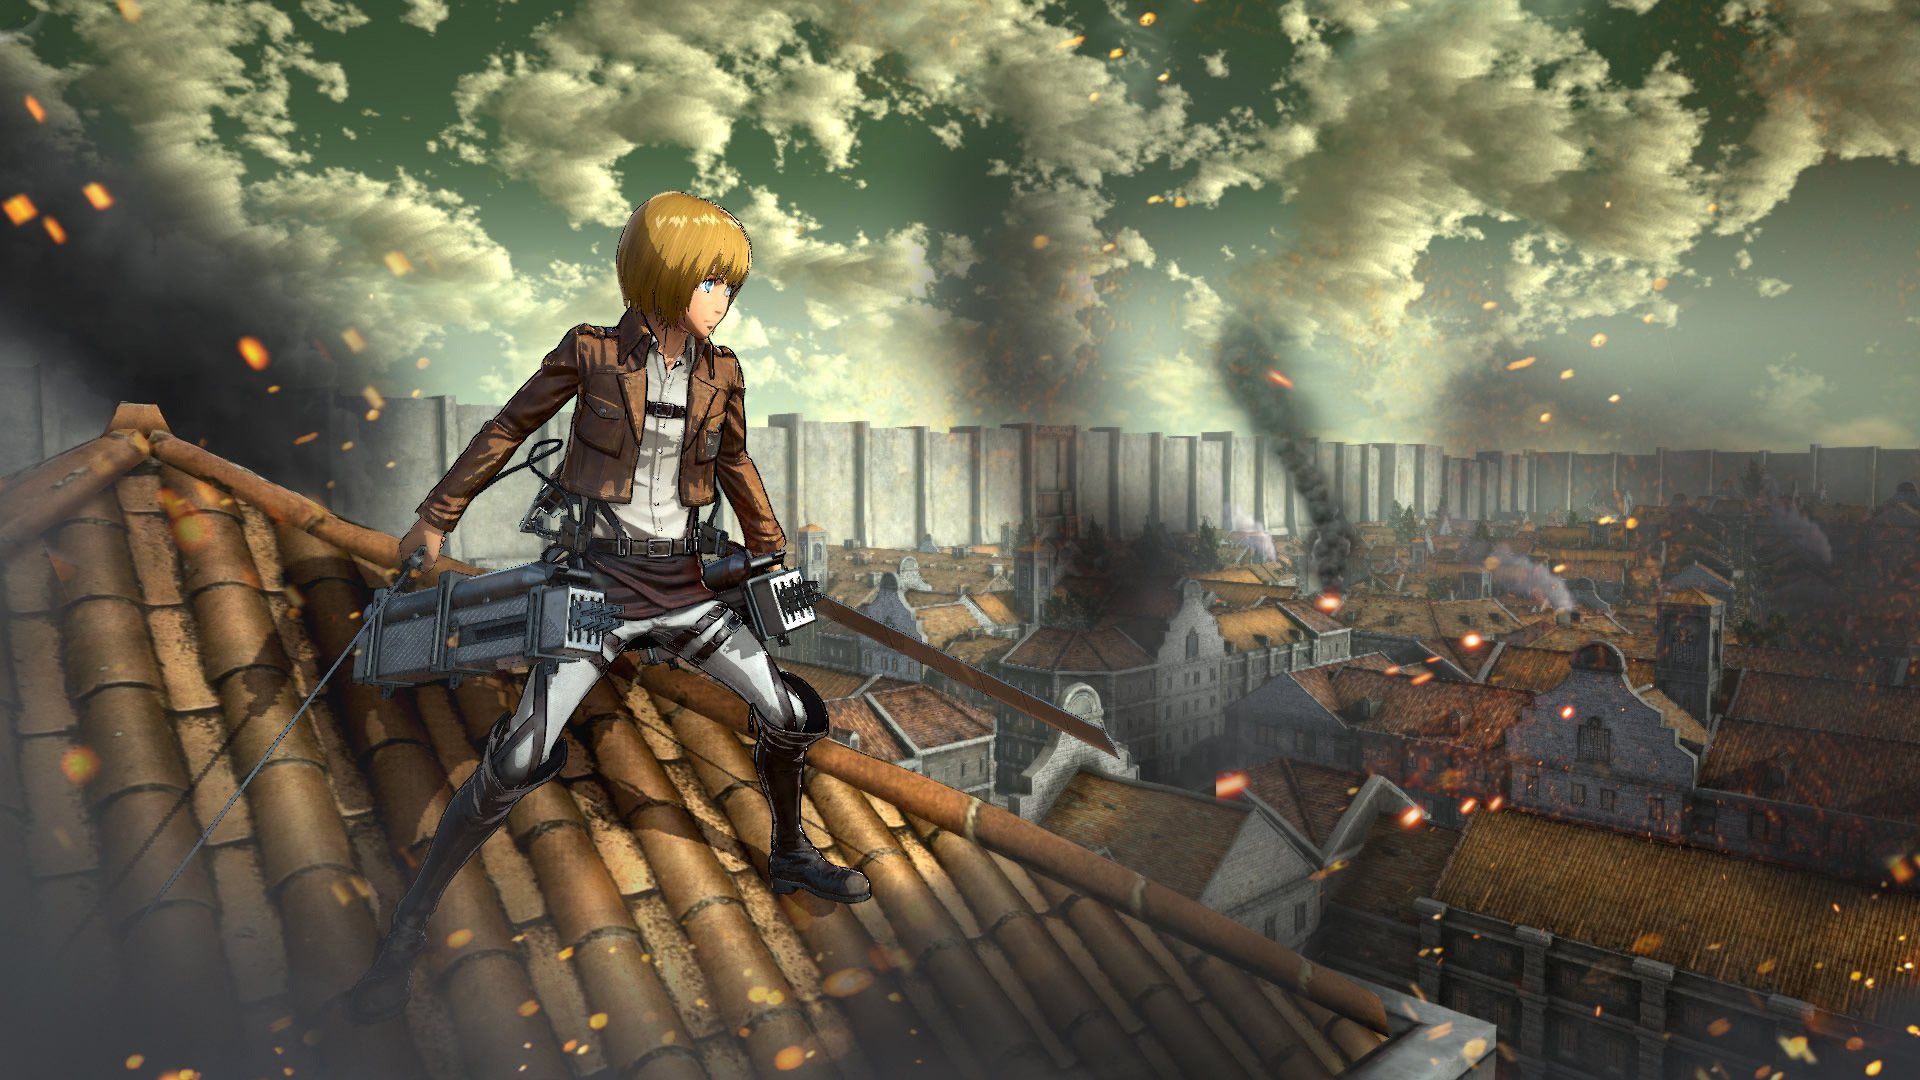 Review: Attack on Titan